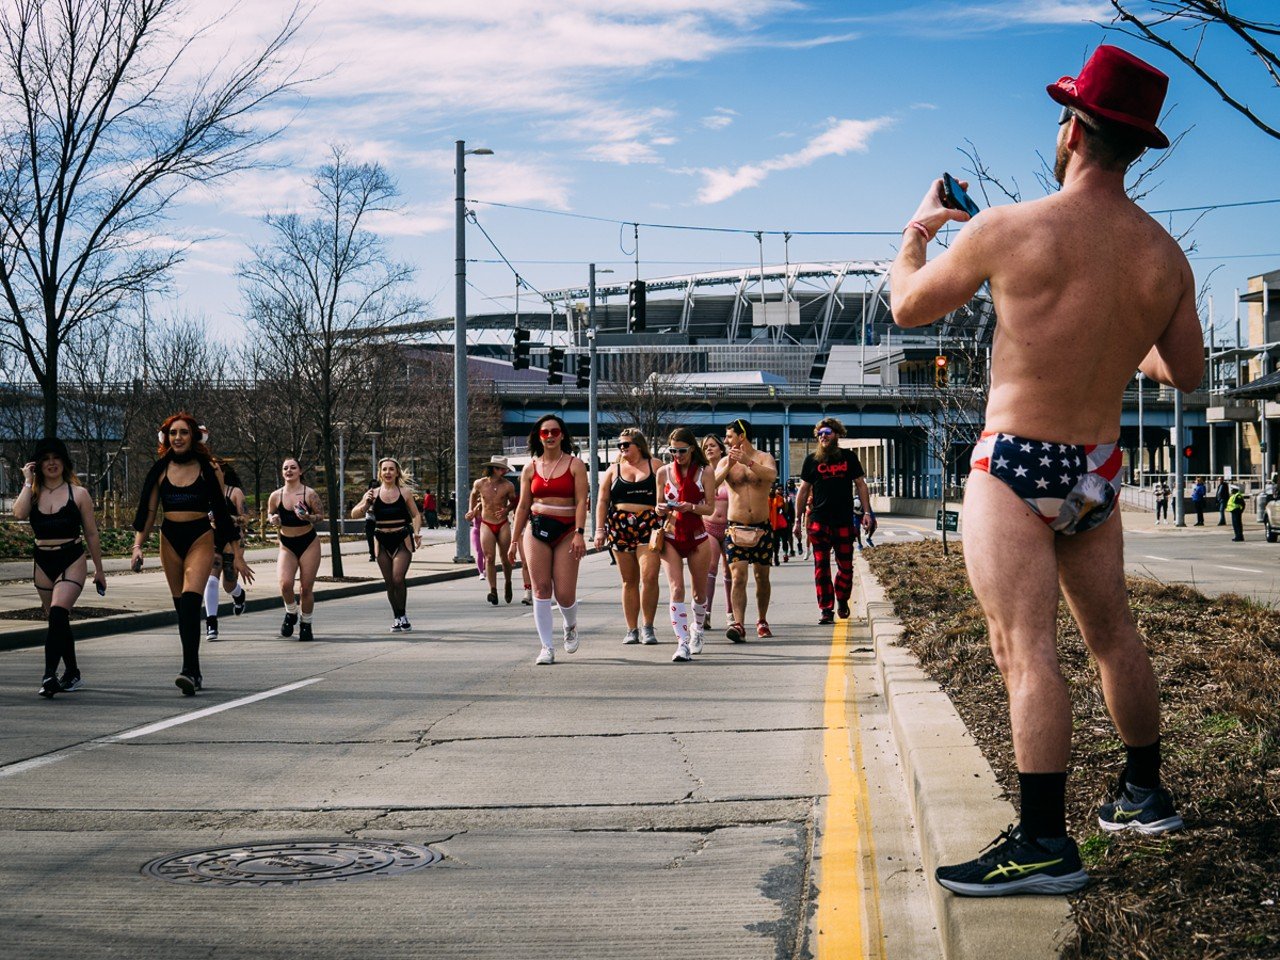 Here's All the Half-Naked Fun We Saw During the Cupid's Undie Run